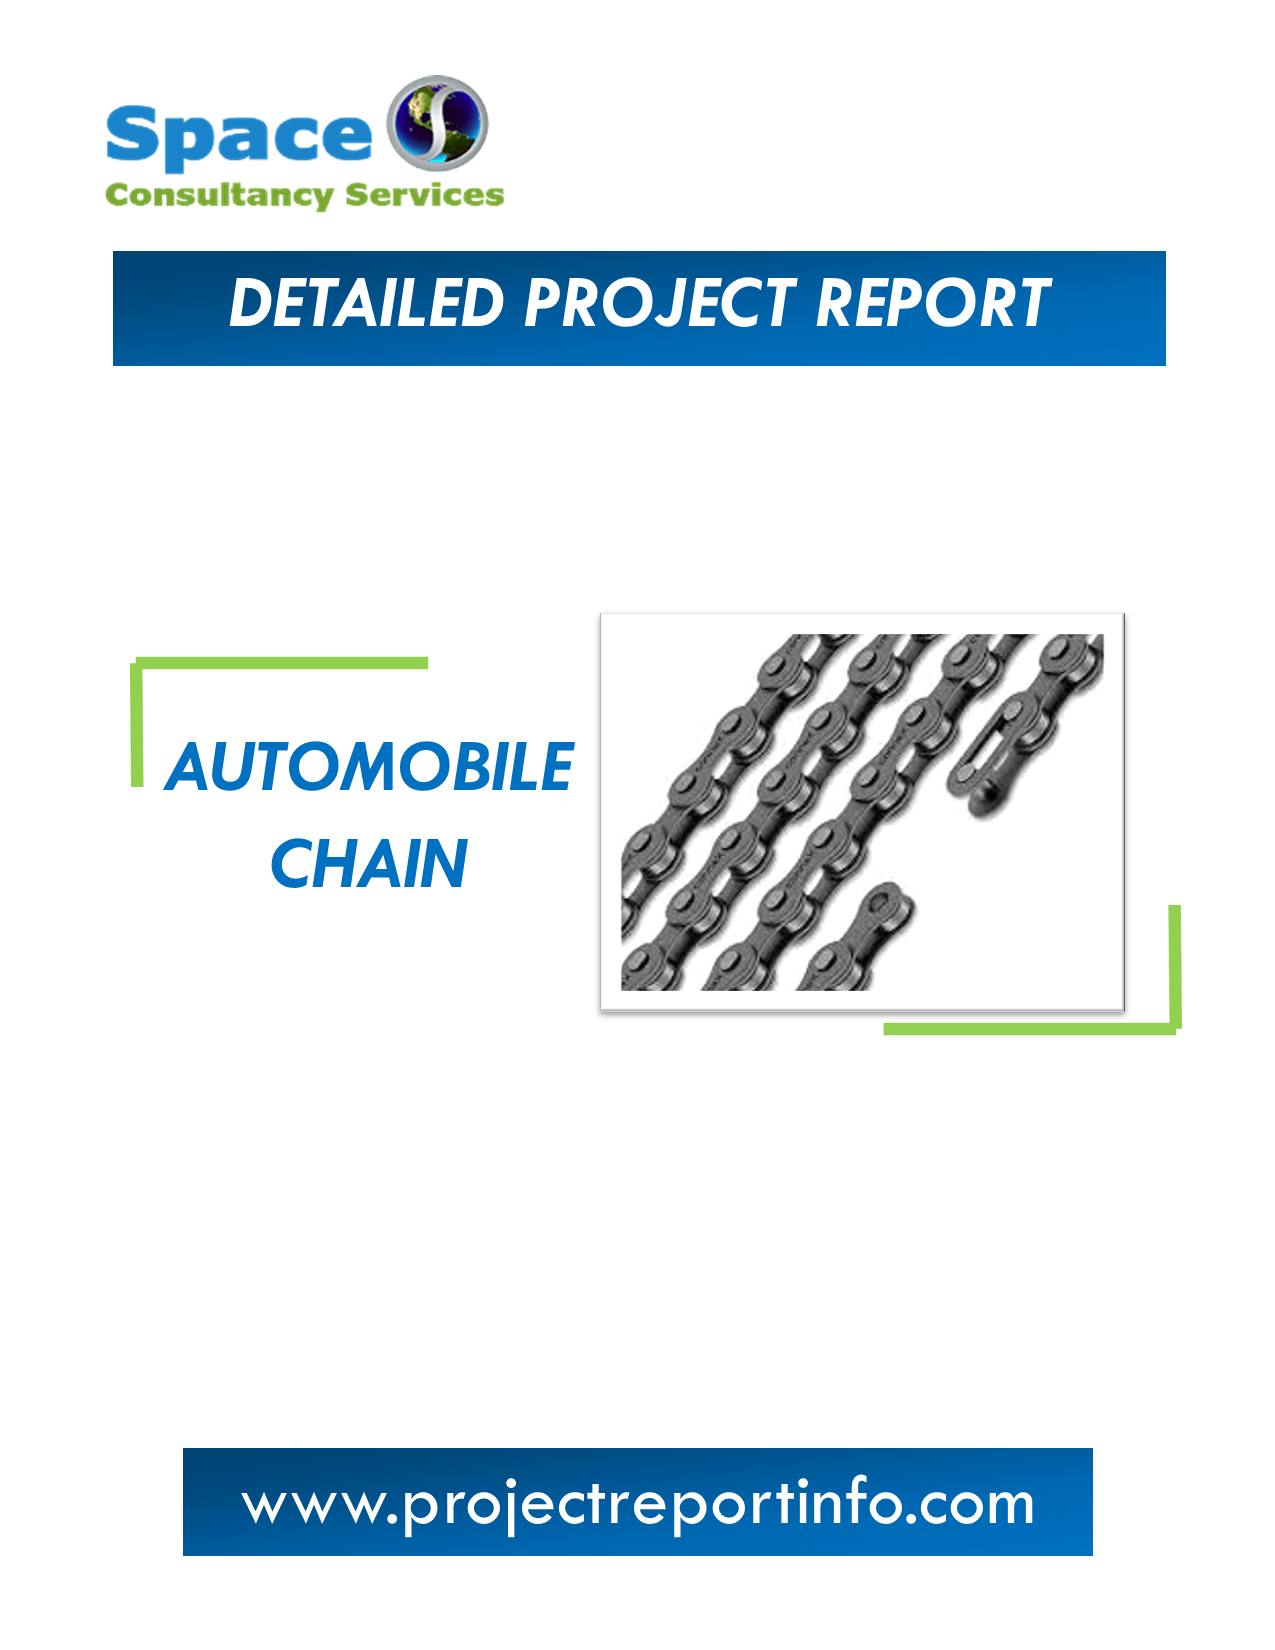 Automobile Chain Manufacturing Project Report